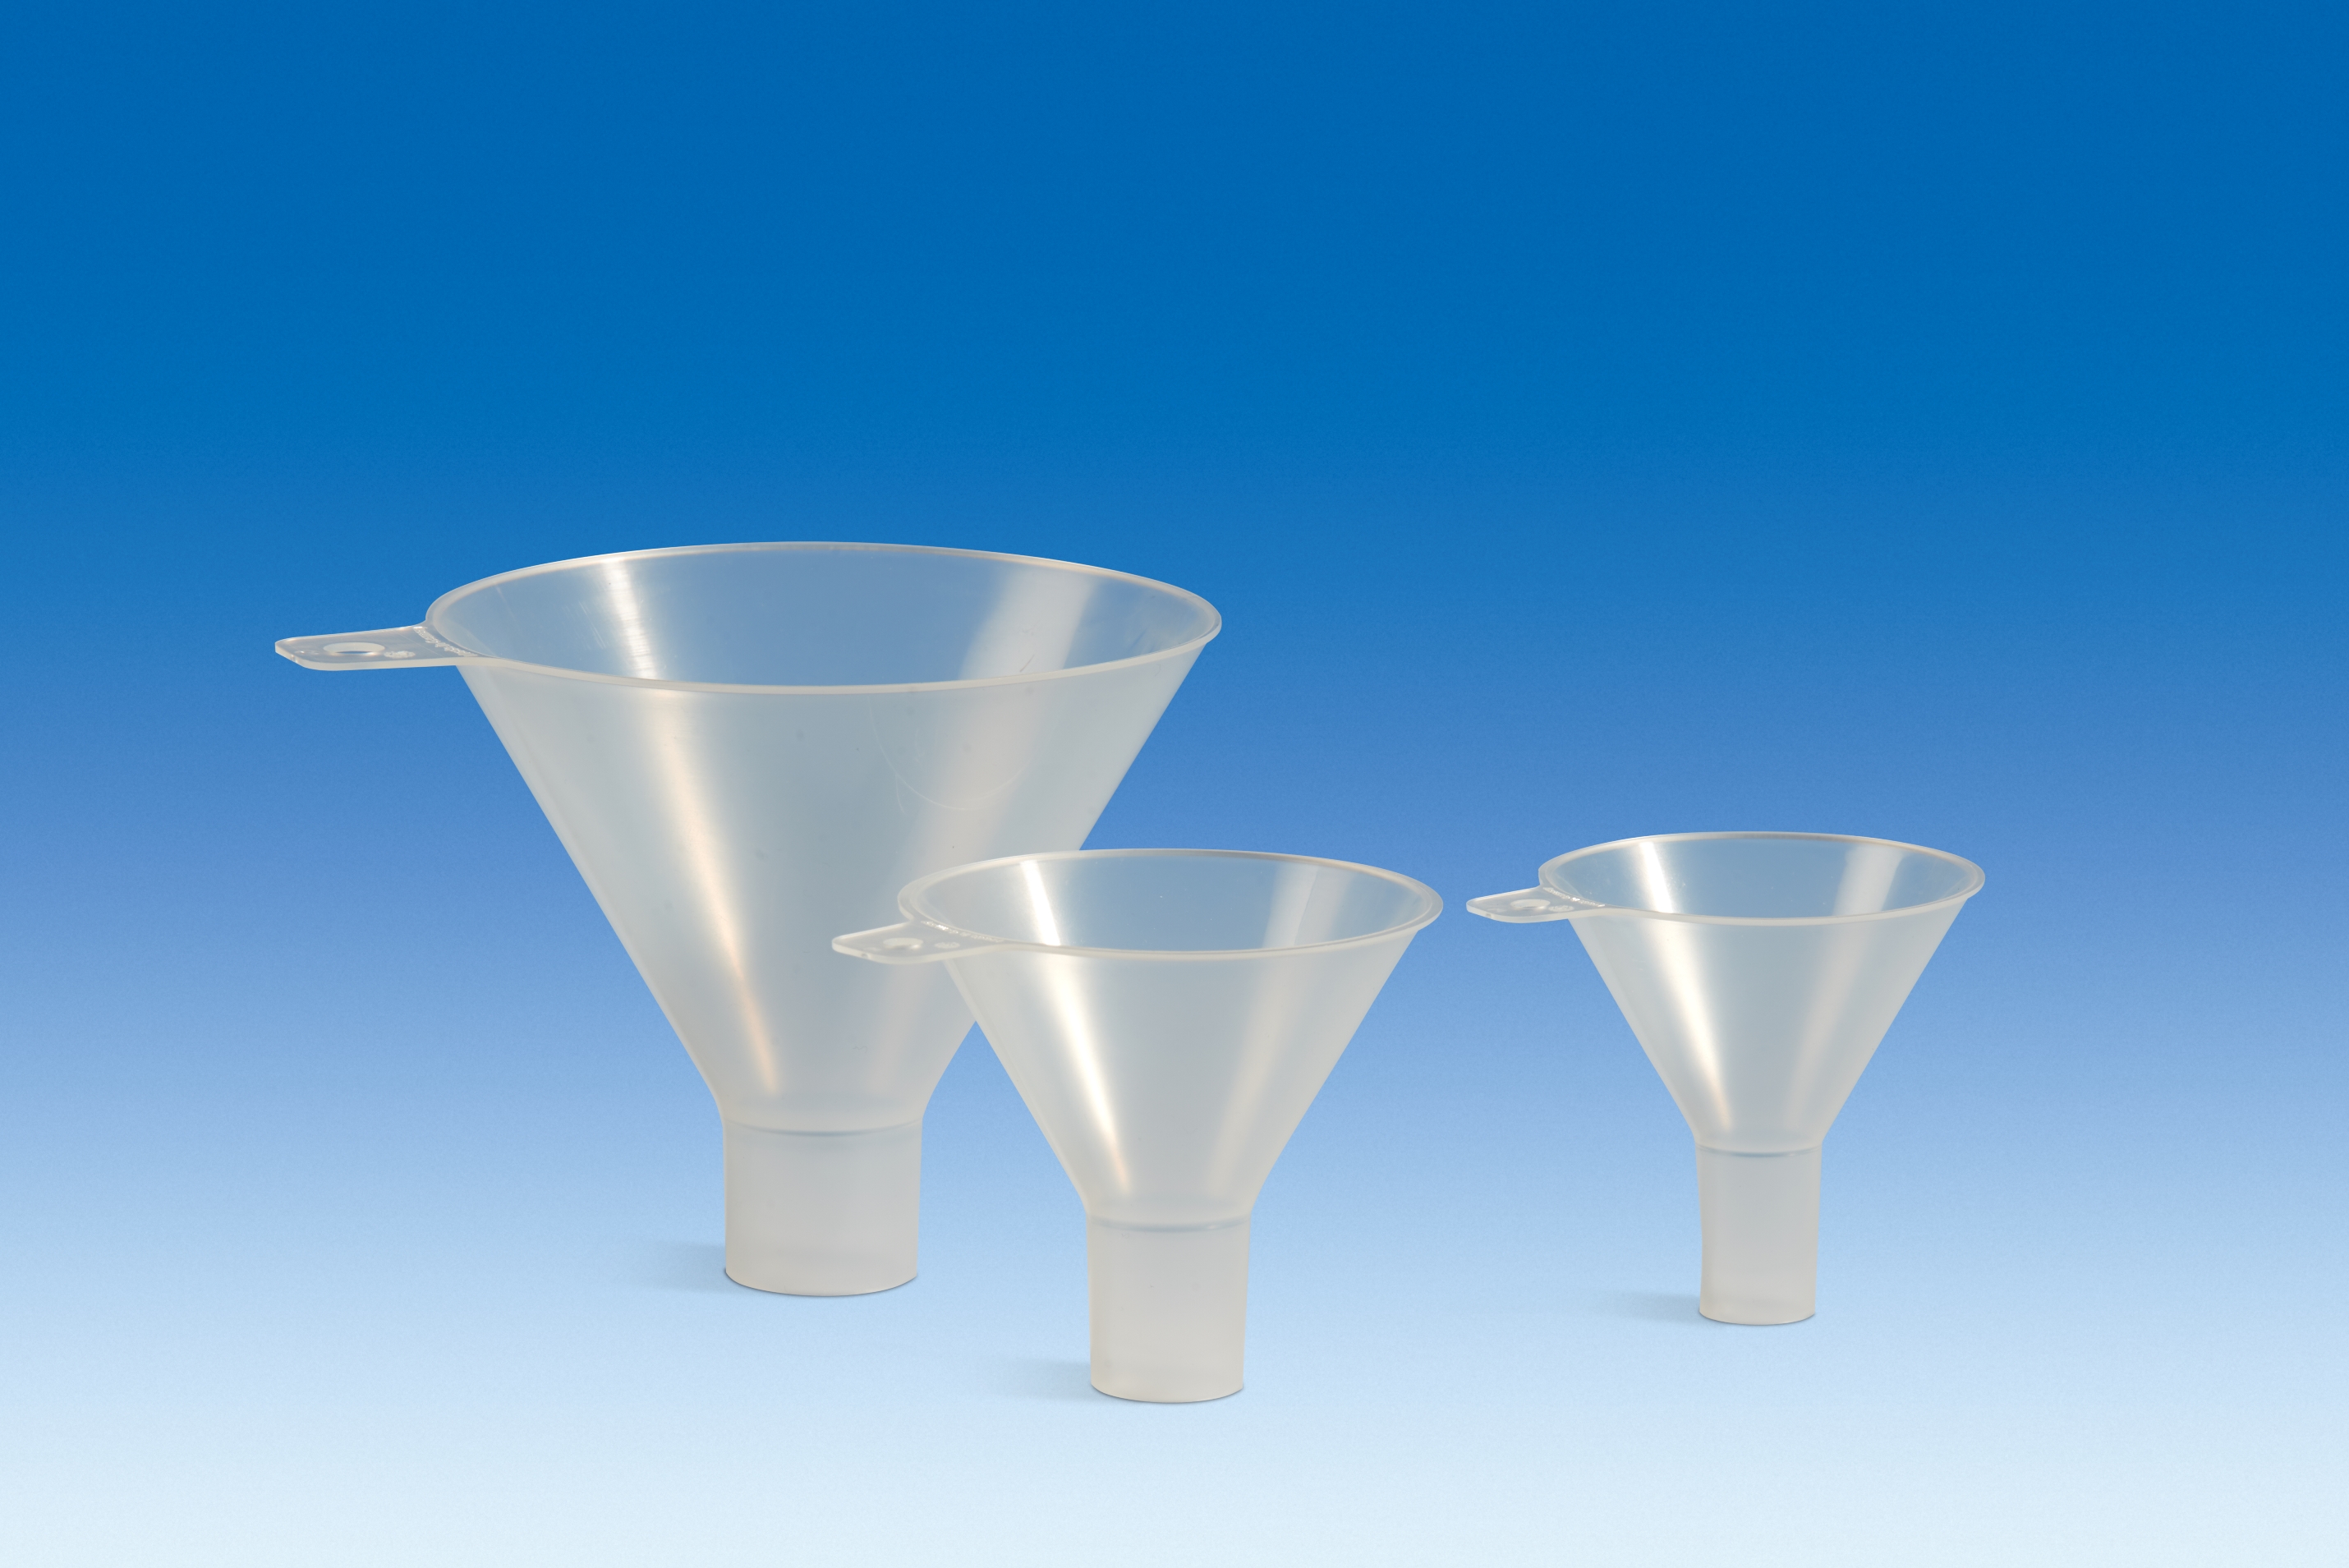 <p>Type of Funnel</p><p>Appearance - typical funnels but have a wider spout and short neck</p><p>Uses - to channel liquids or fine-grained chemicals (powders) into labware with a narrow neck or opening,</p><ul><li><p>enable the clean transfer of powders, granulated materials, or other solids</p></li></ul>